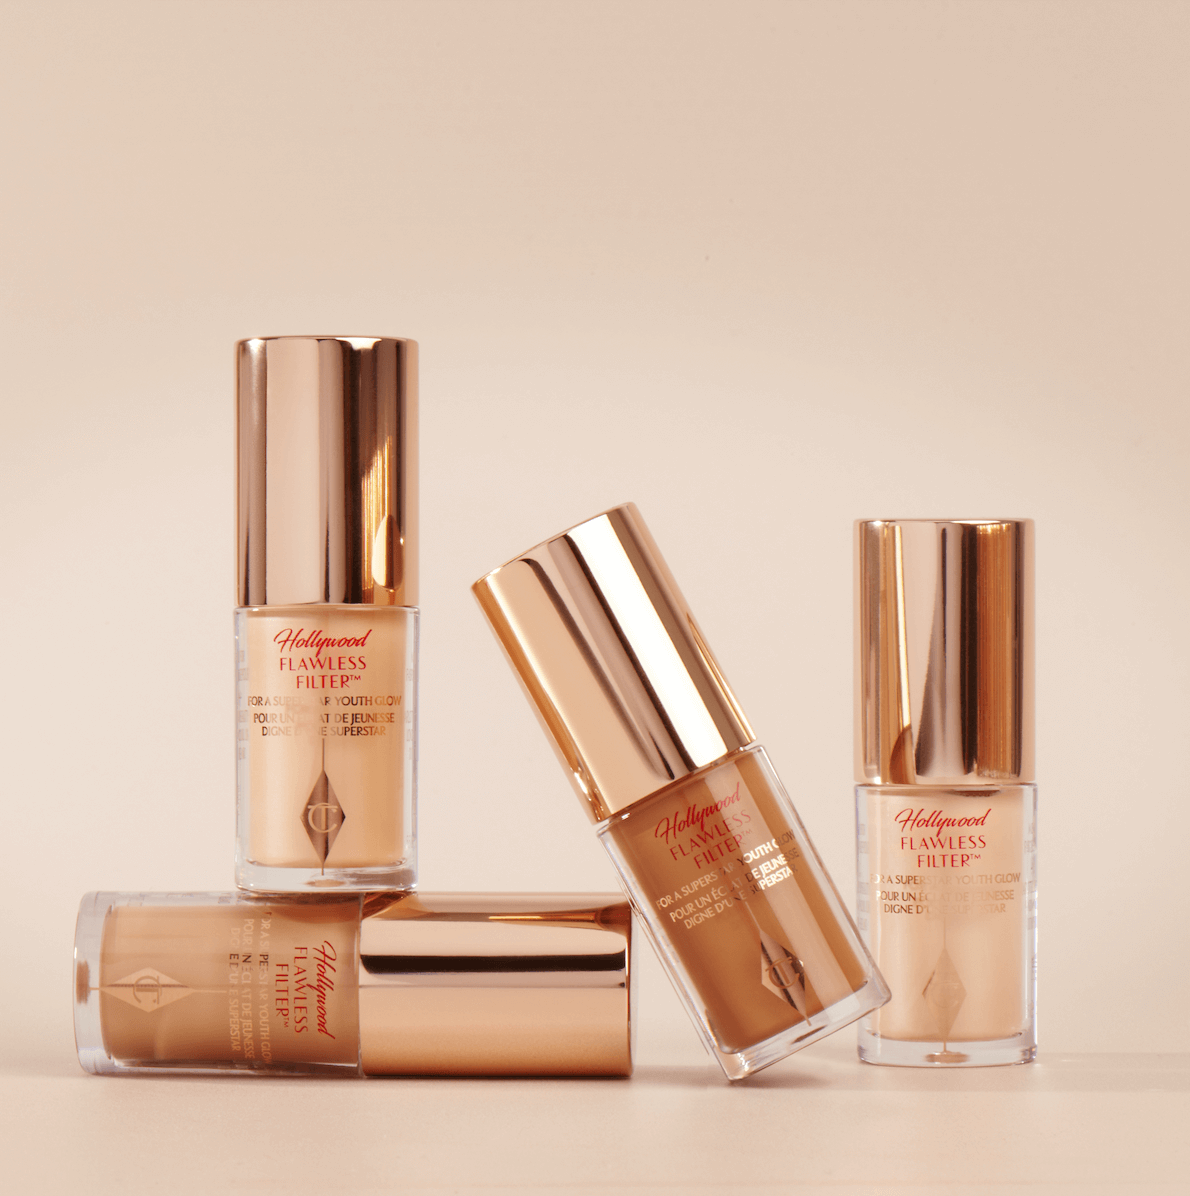 CHARLOTTE TILBURY Charlotte Tilbury Hollywood Flawless Filter for a  Superstar Youth Glow Foundation - Shade 4 Medium, Beige